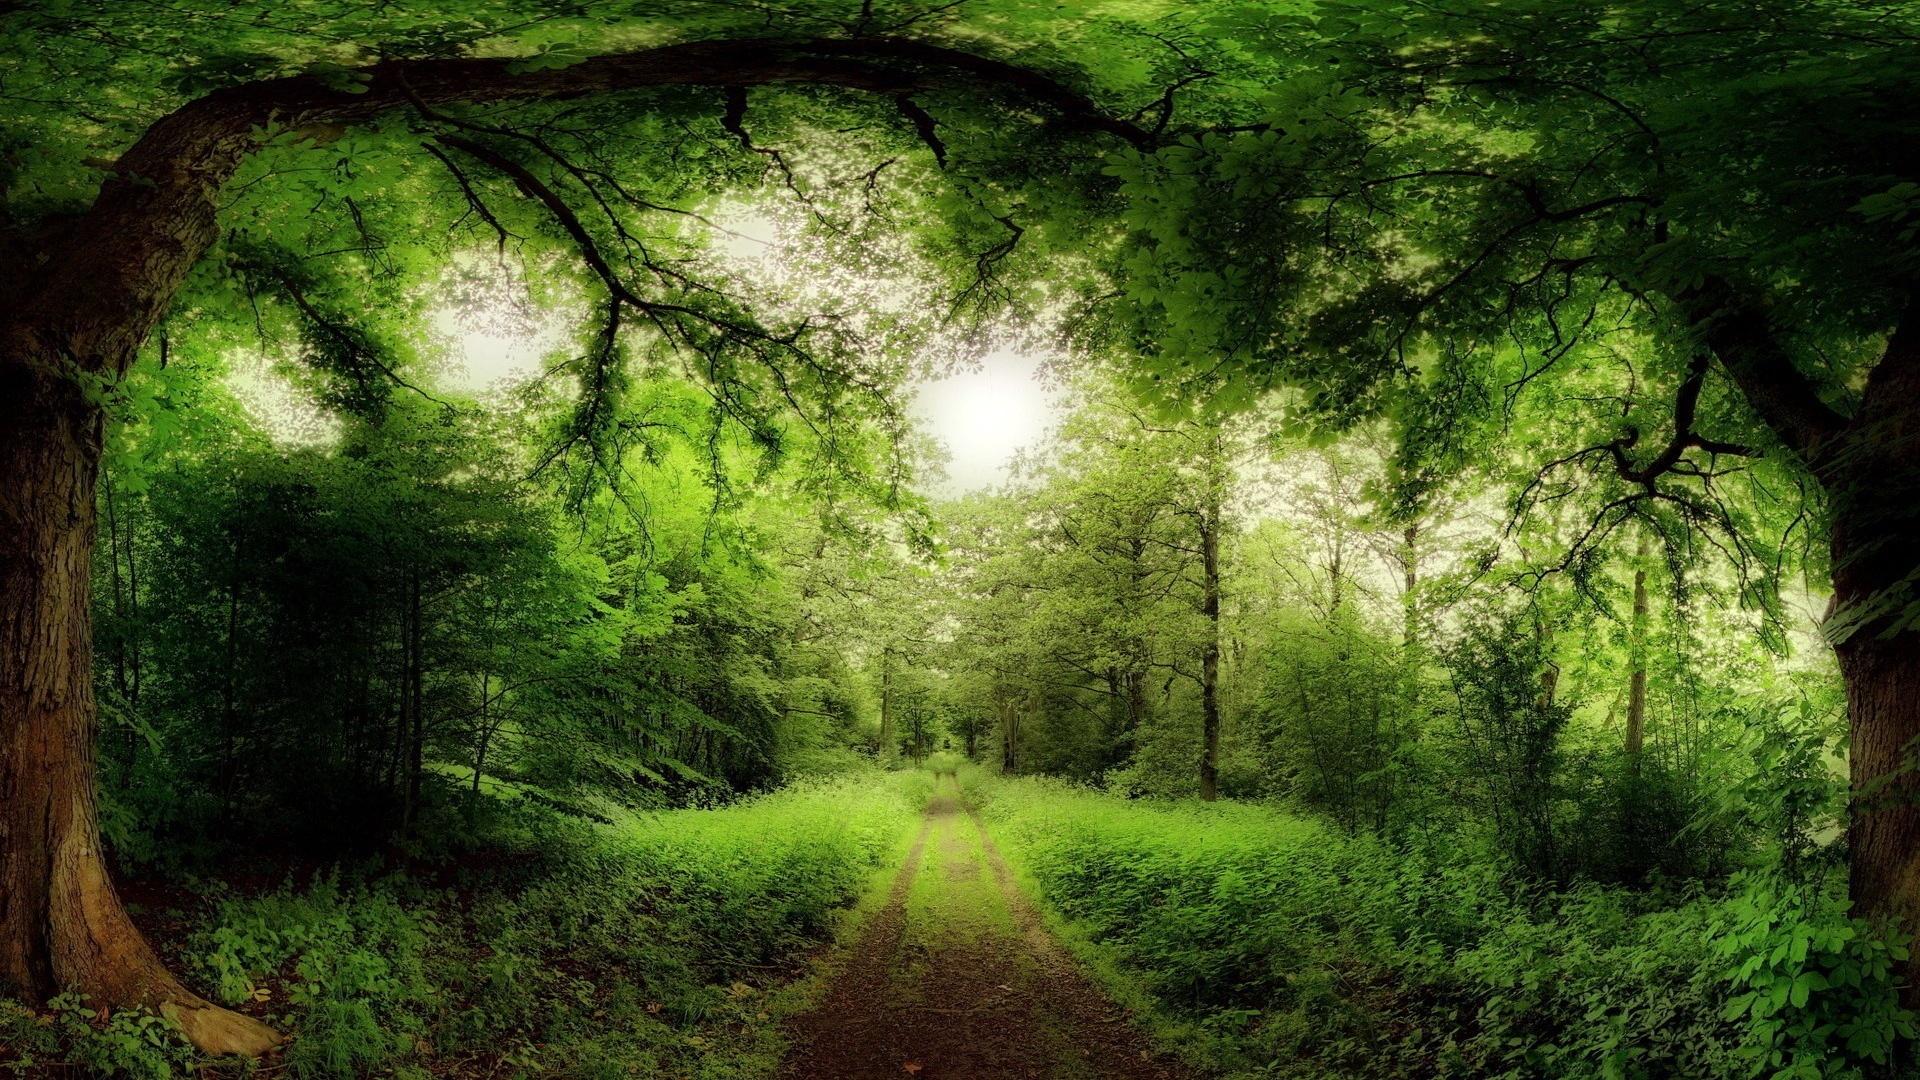  Images HD Road Through Magical Forest Wallpapers   Fullsize Wallpaper